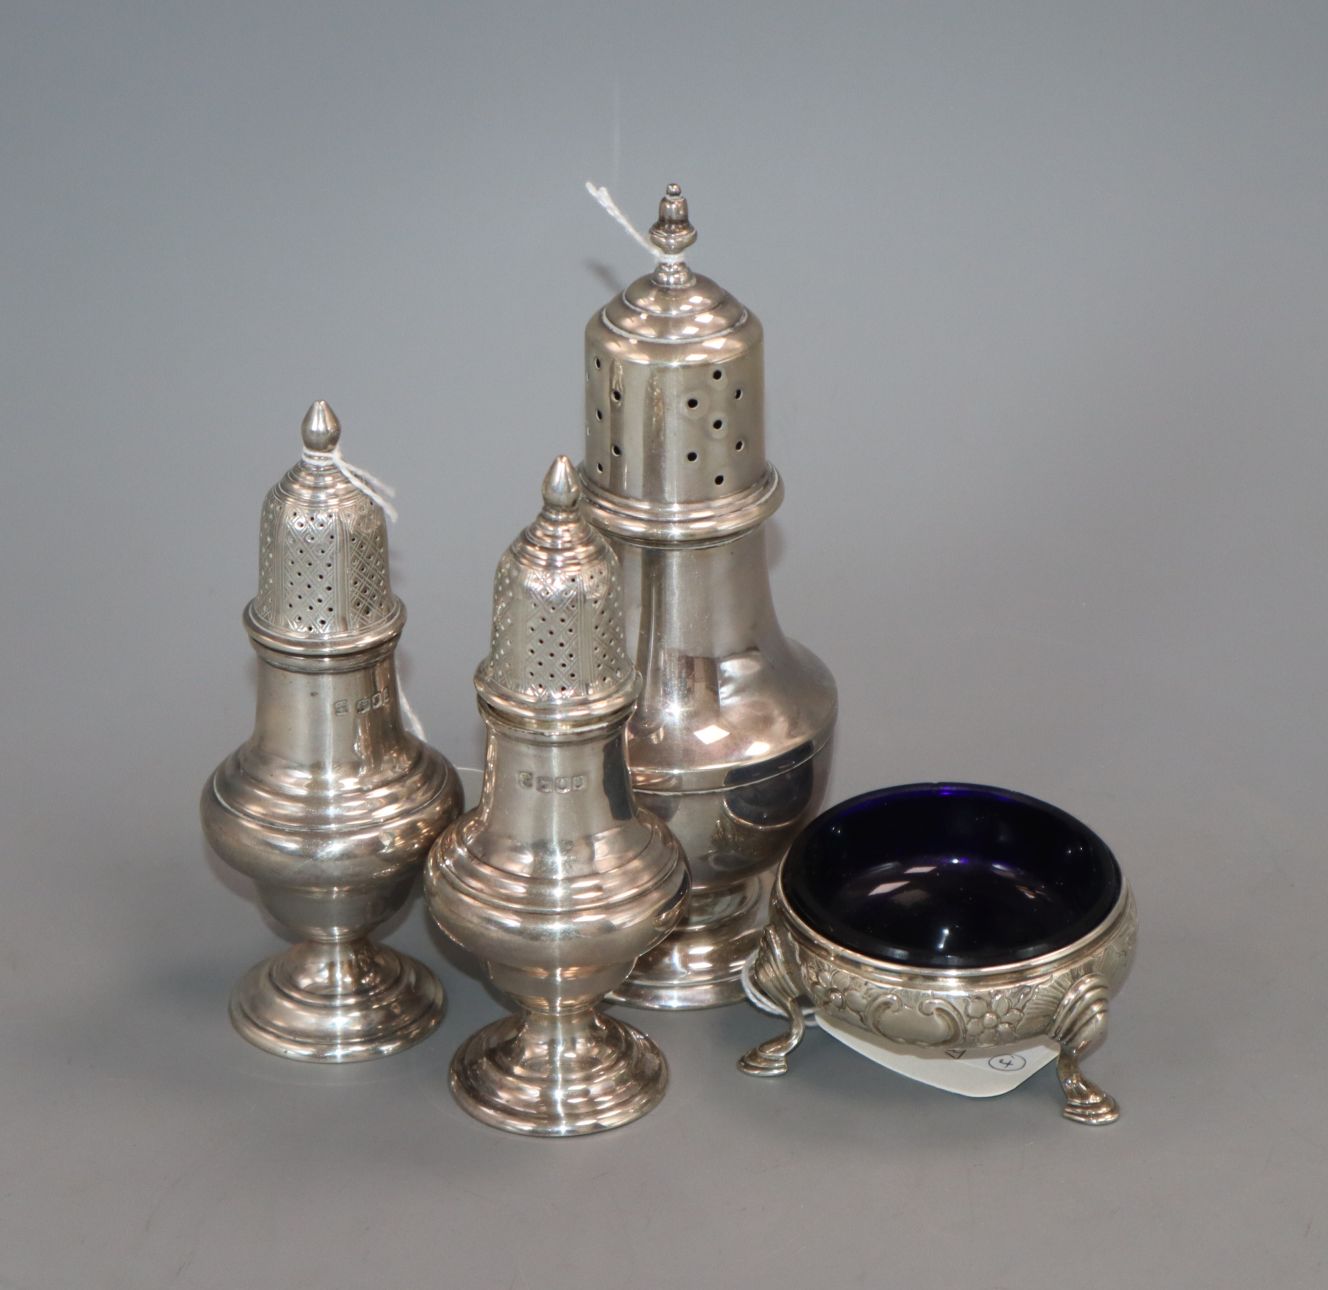 A pair of George V silver baluster-shaped peppers, London 1916, a silver sugar caster and a George